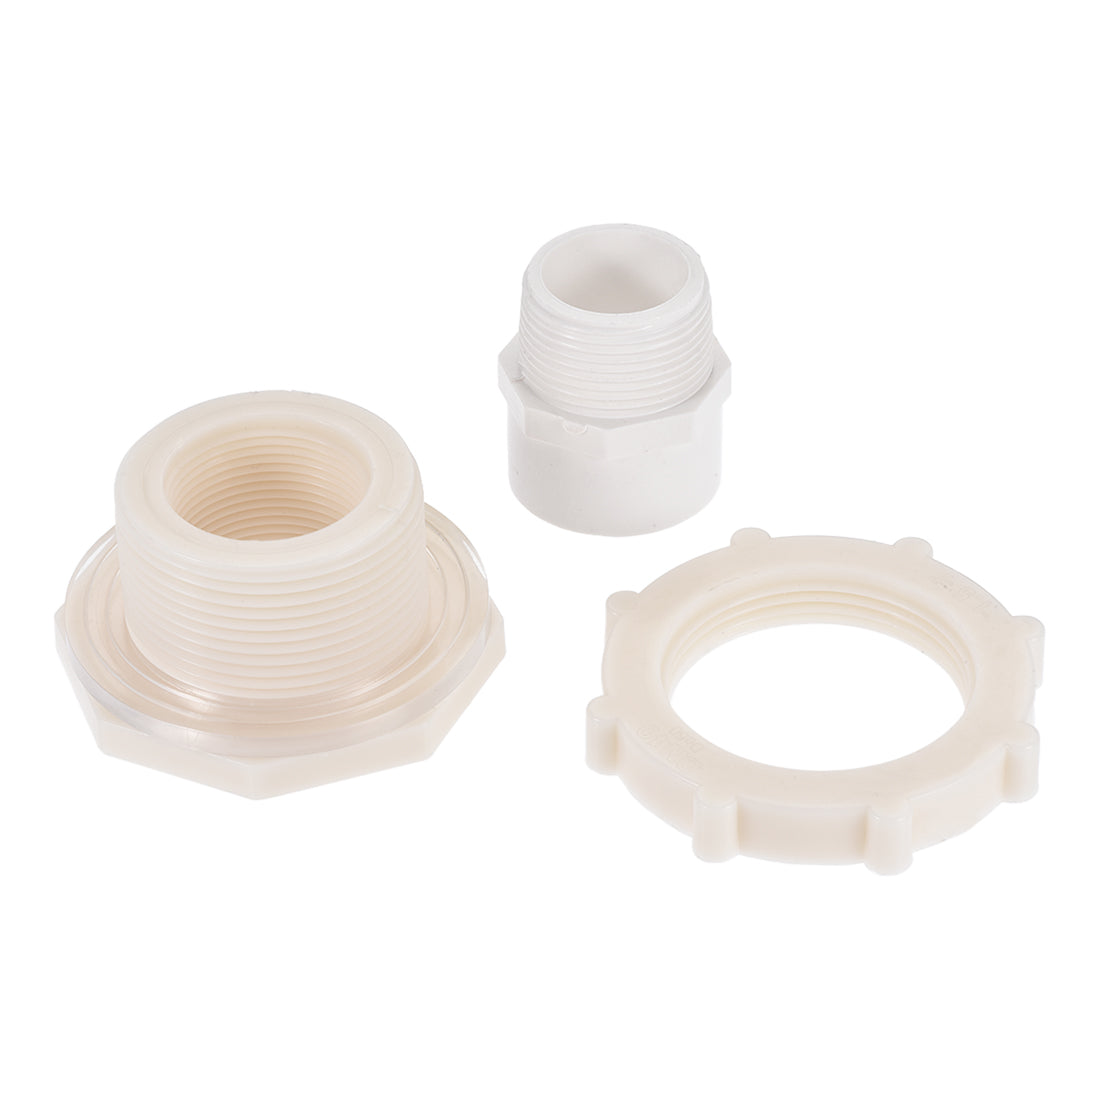 uxcell Uxcell Bulkhead Fitting, G1-1/4 Female 2.44" Male, Tube Adaptor Fitting, with Silicone Gasket and Pipe Connector, for Water Tanks, PVC, White